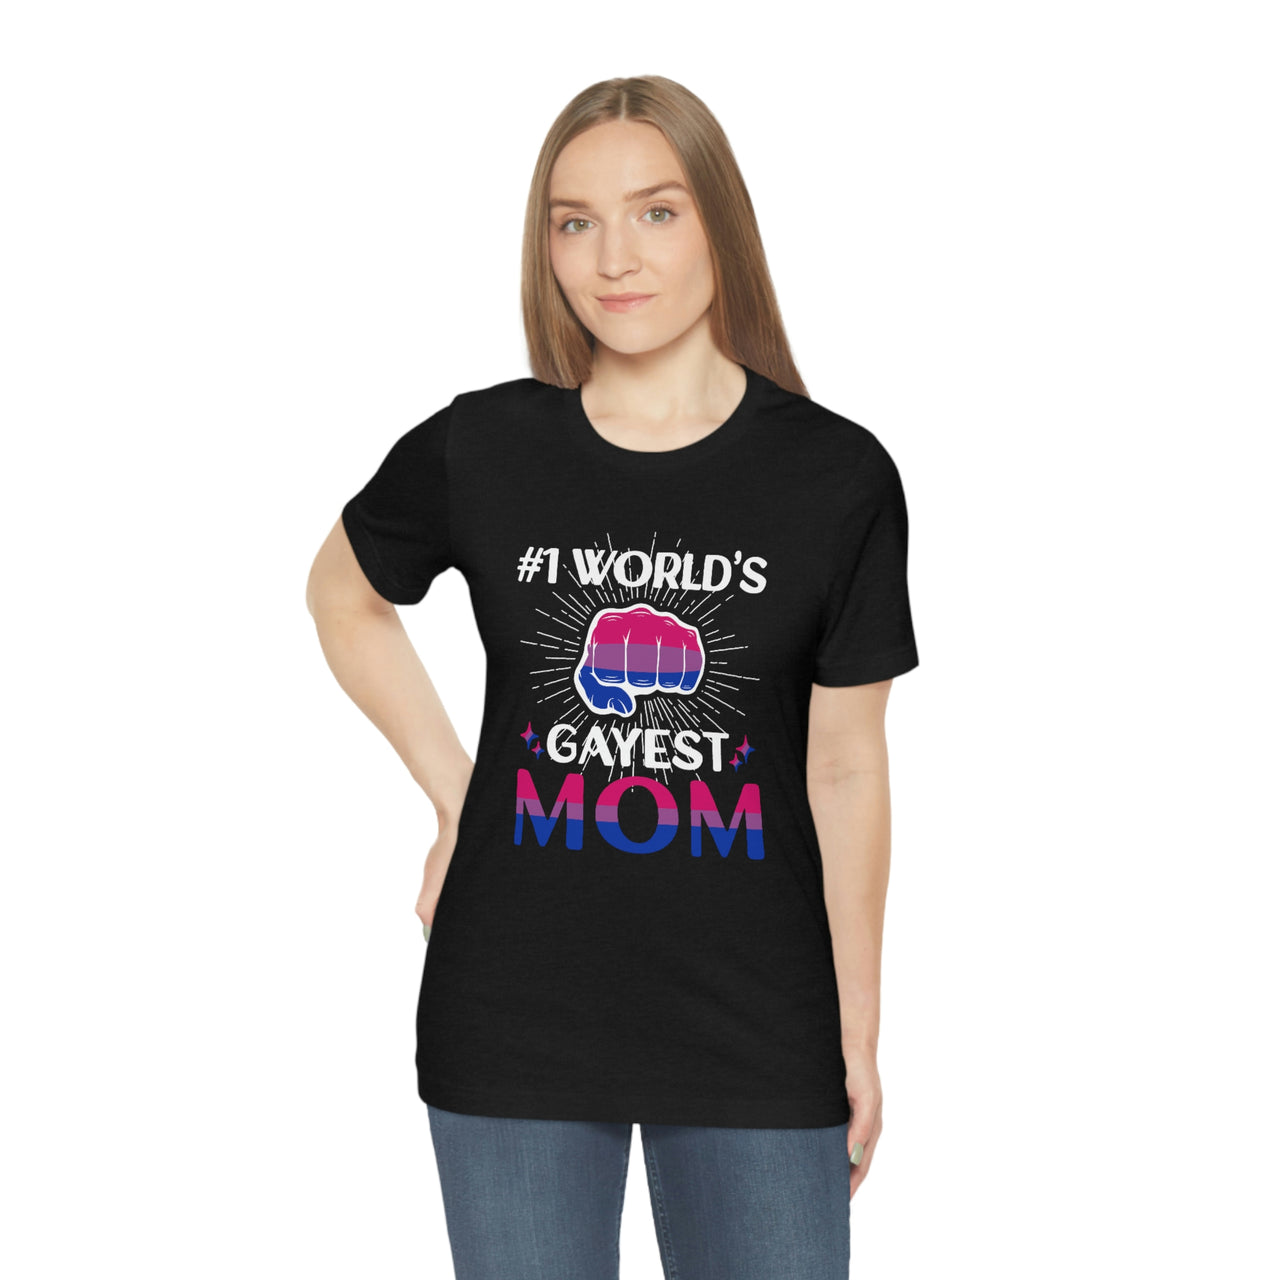 Bisexual Pride Flag Mother's Day Unisex Short Sleeve Tee - #1 World's Gayest Mom SHAVA CO